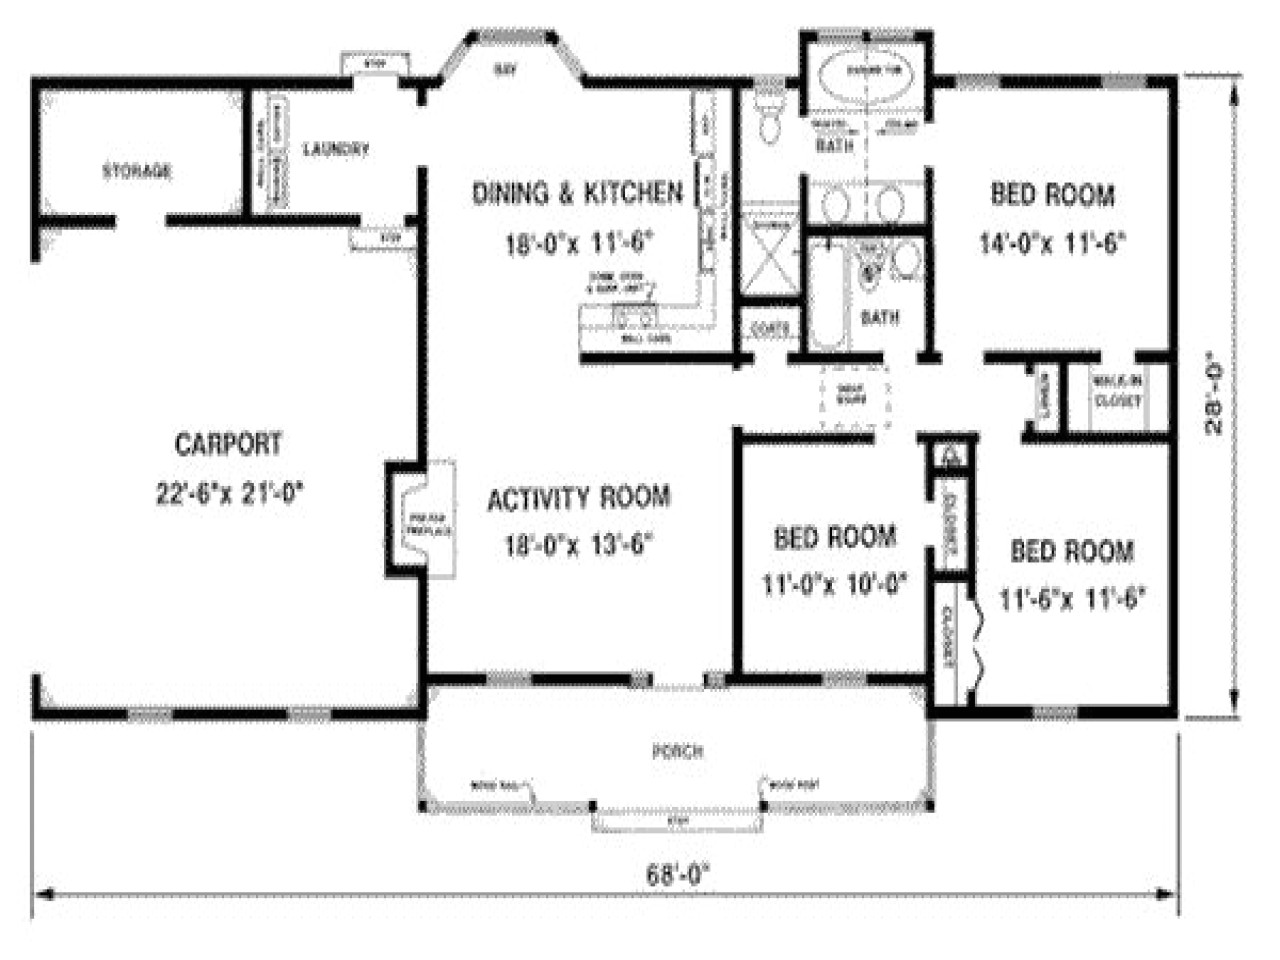 1300 Square Feet Home Plan 1300 Square Foot House Plans 1300 Sq Ft House with Porch